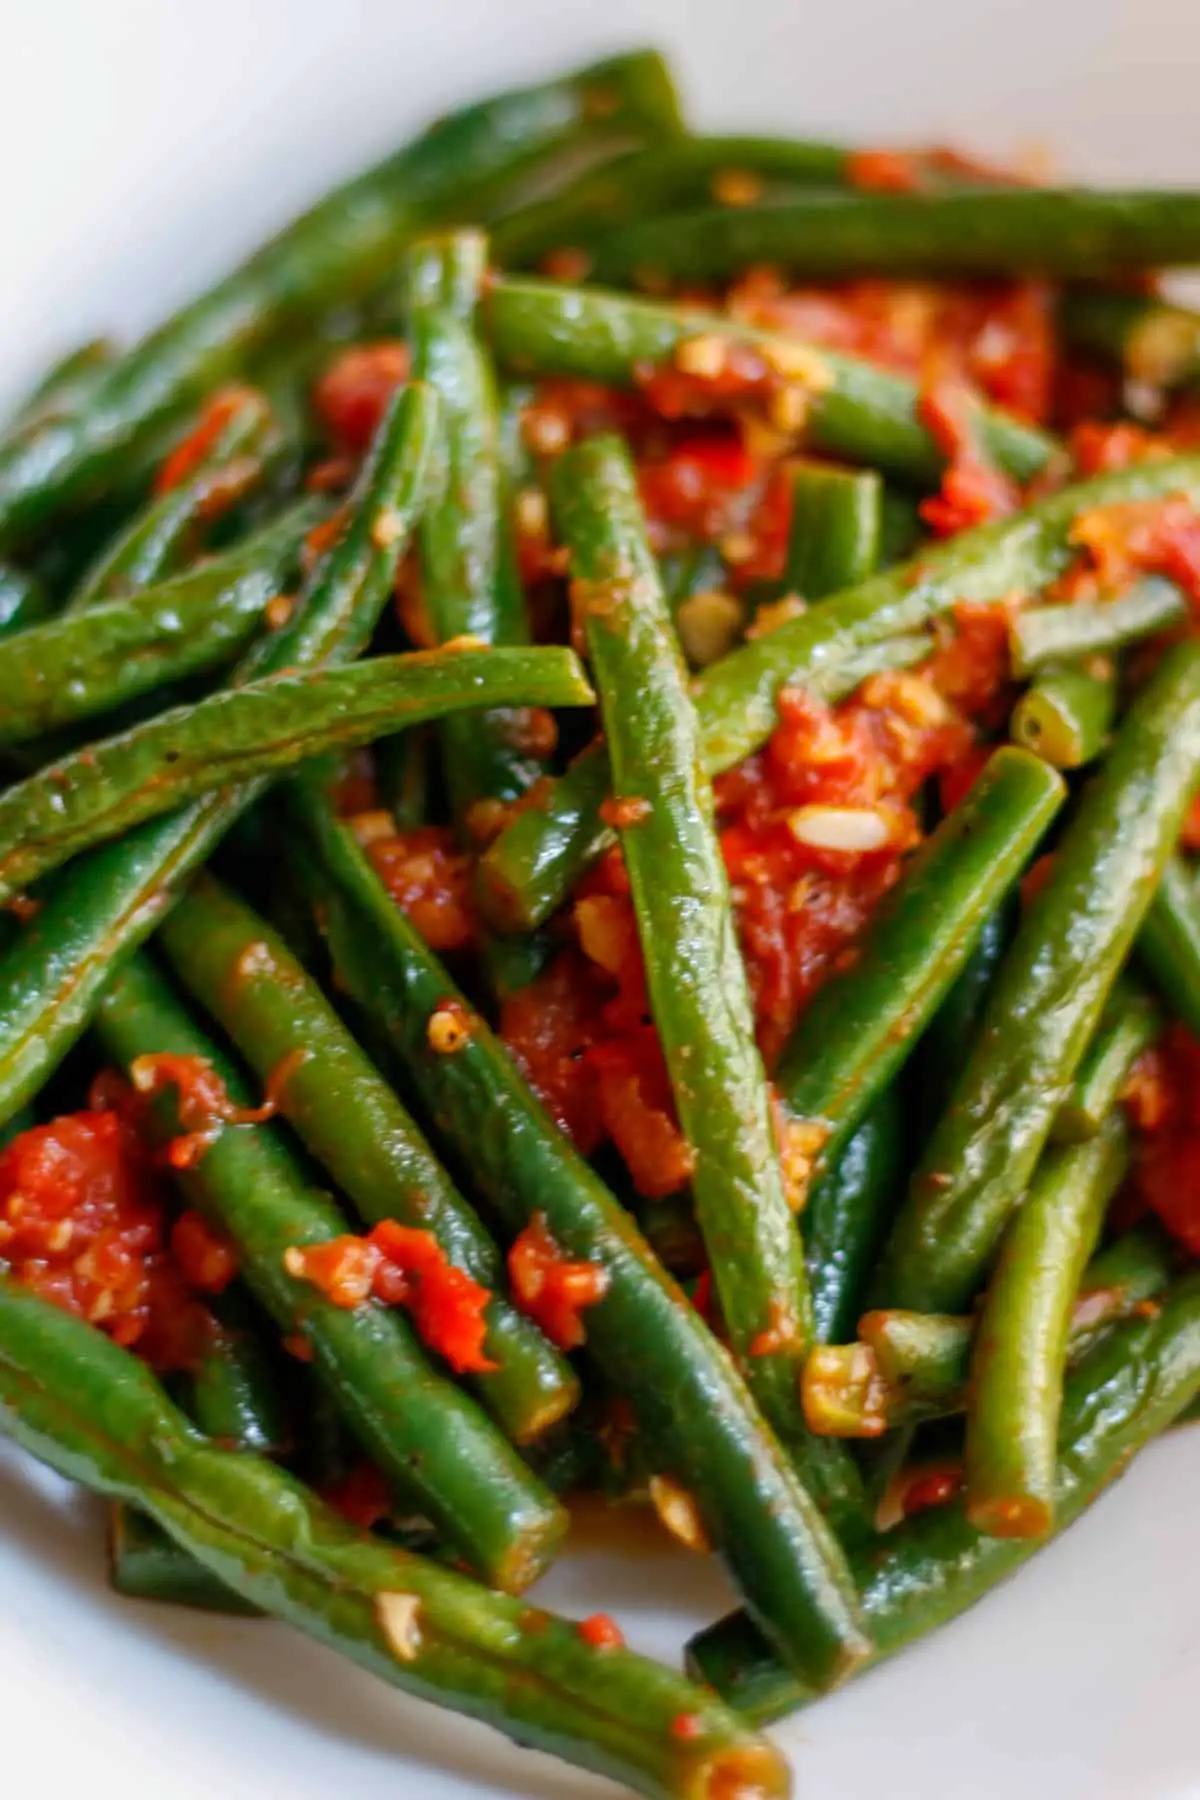 Green beans and tomatoes in a white dish.